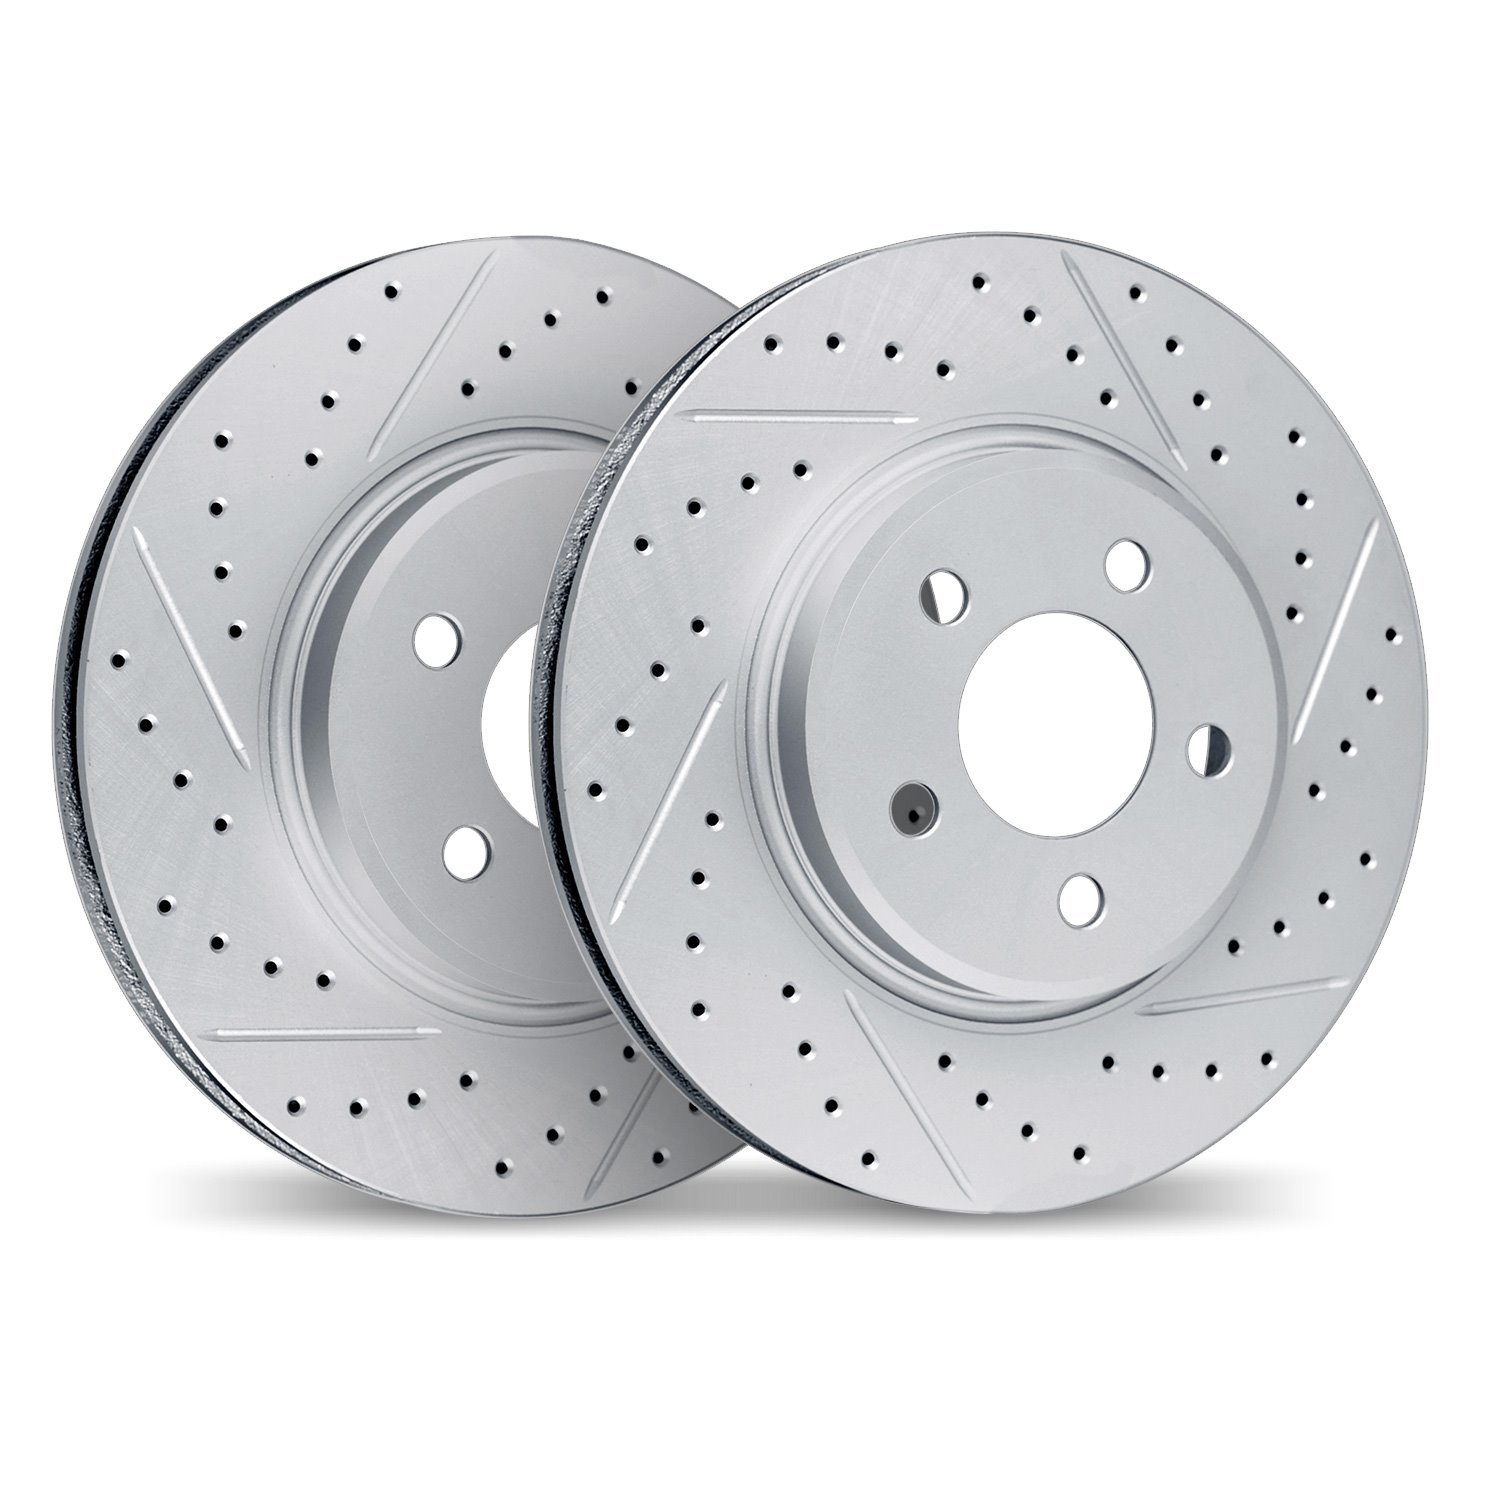 2002-47019 Geoperformance Drilled/Slotted Brake Rotors, 1988-1994 GM, Position: Front